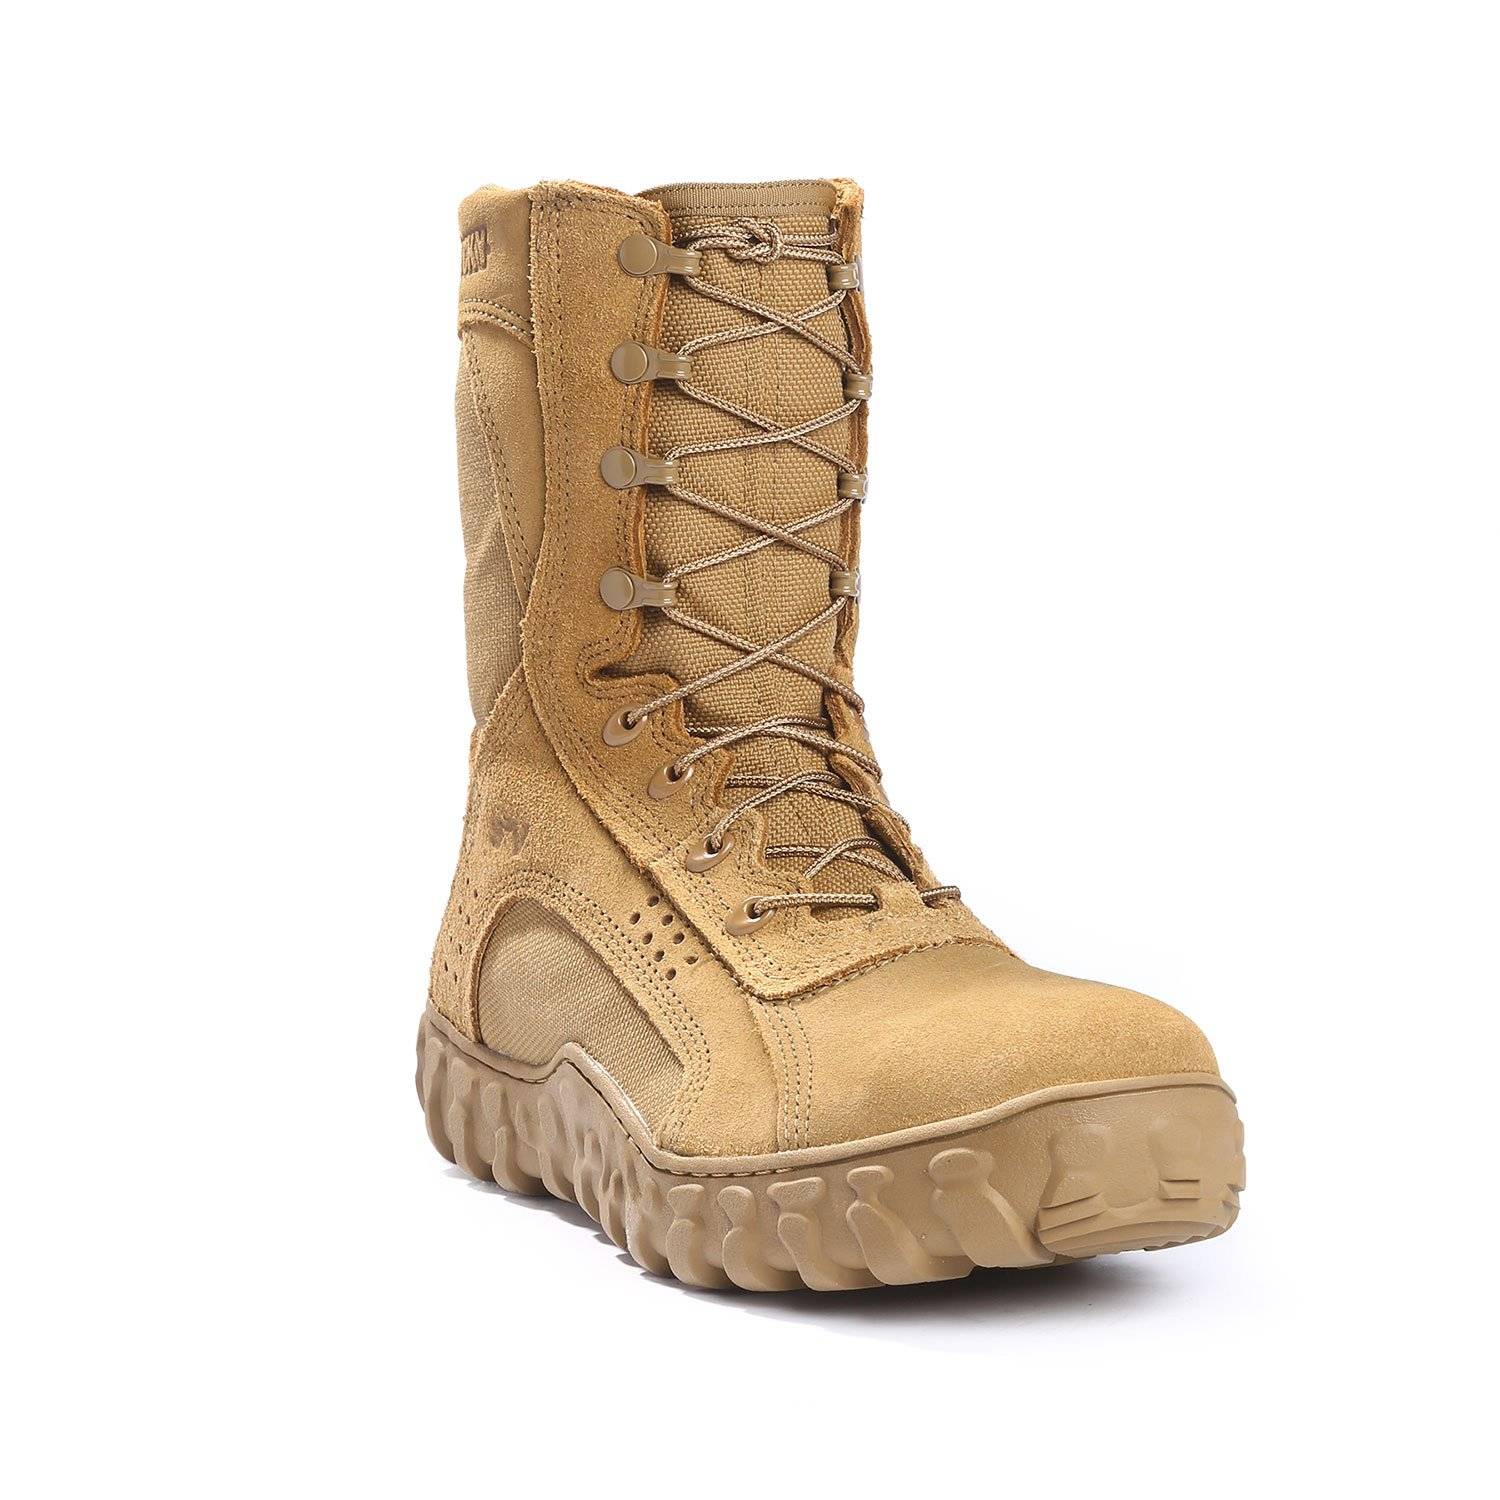 rocky composite toe military boots